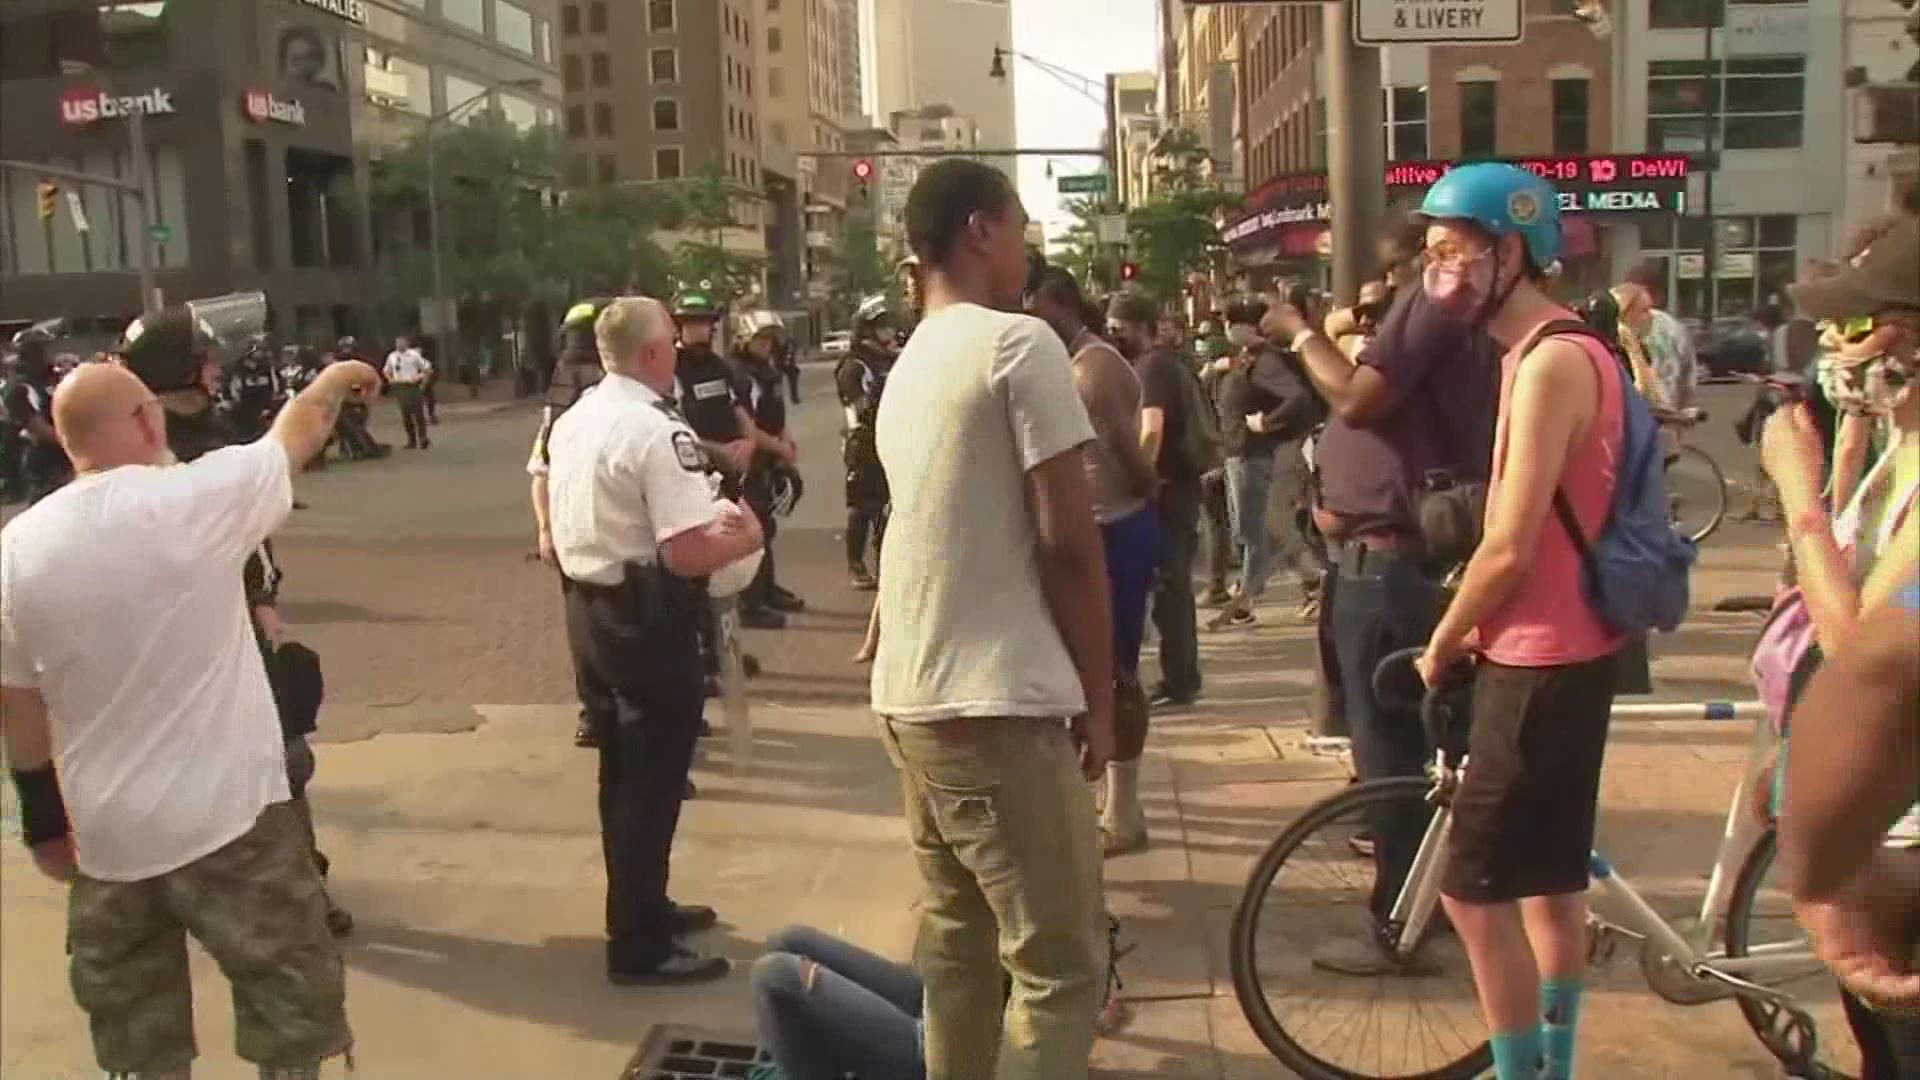 Videos of the protests from over the weekend are continuing to surface on social media showing confrontations between Columbus police officers and protesters.